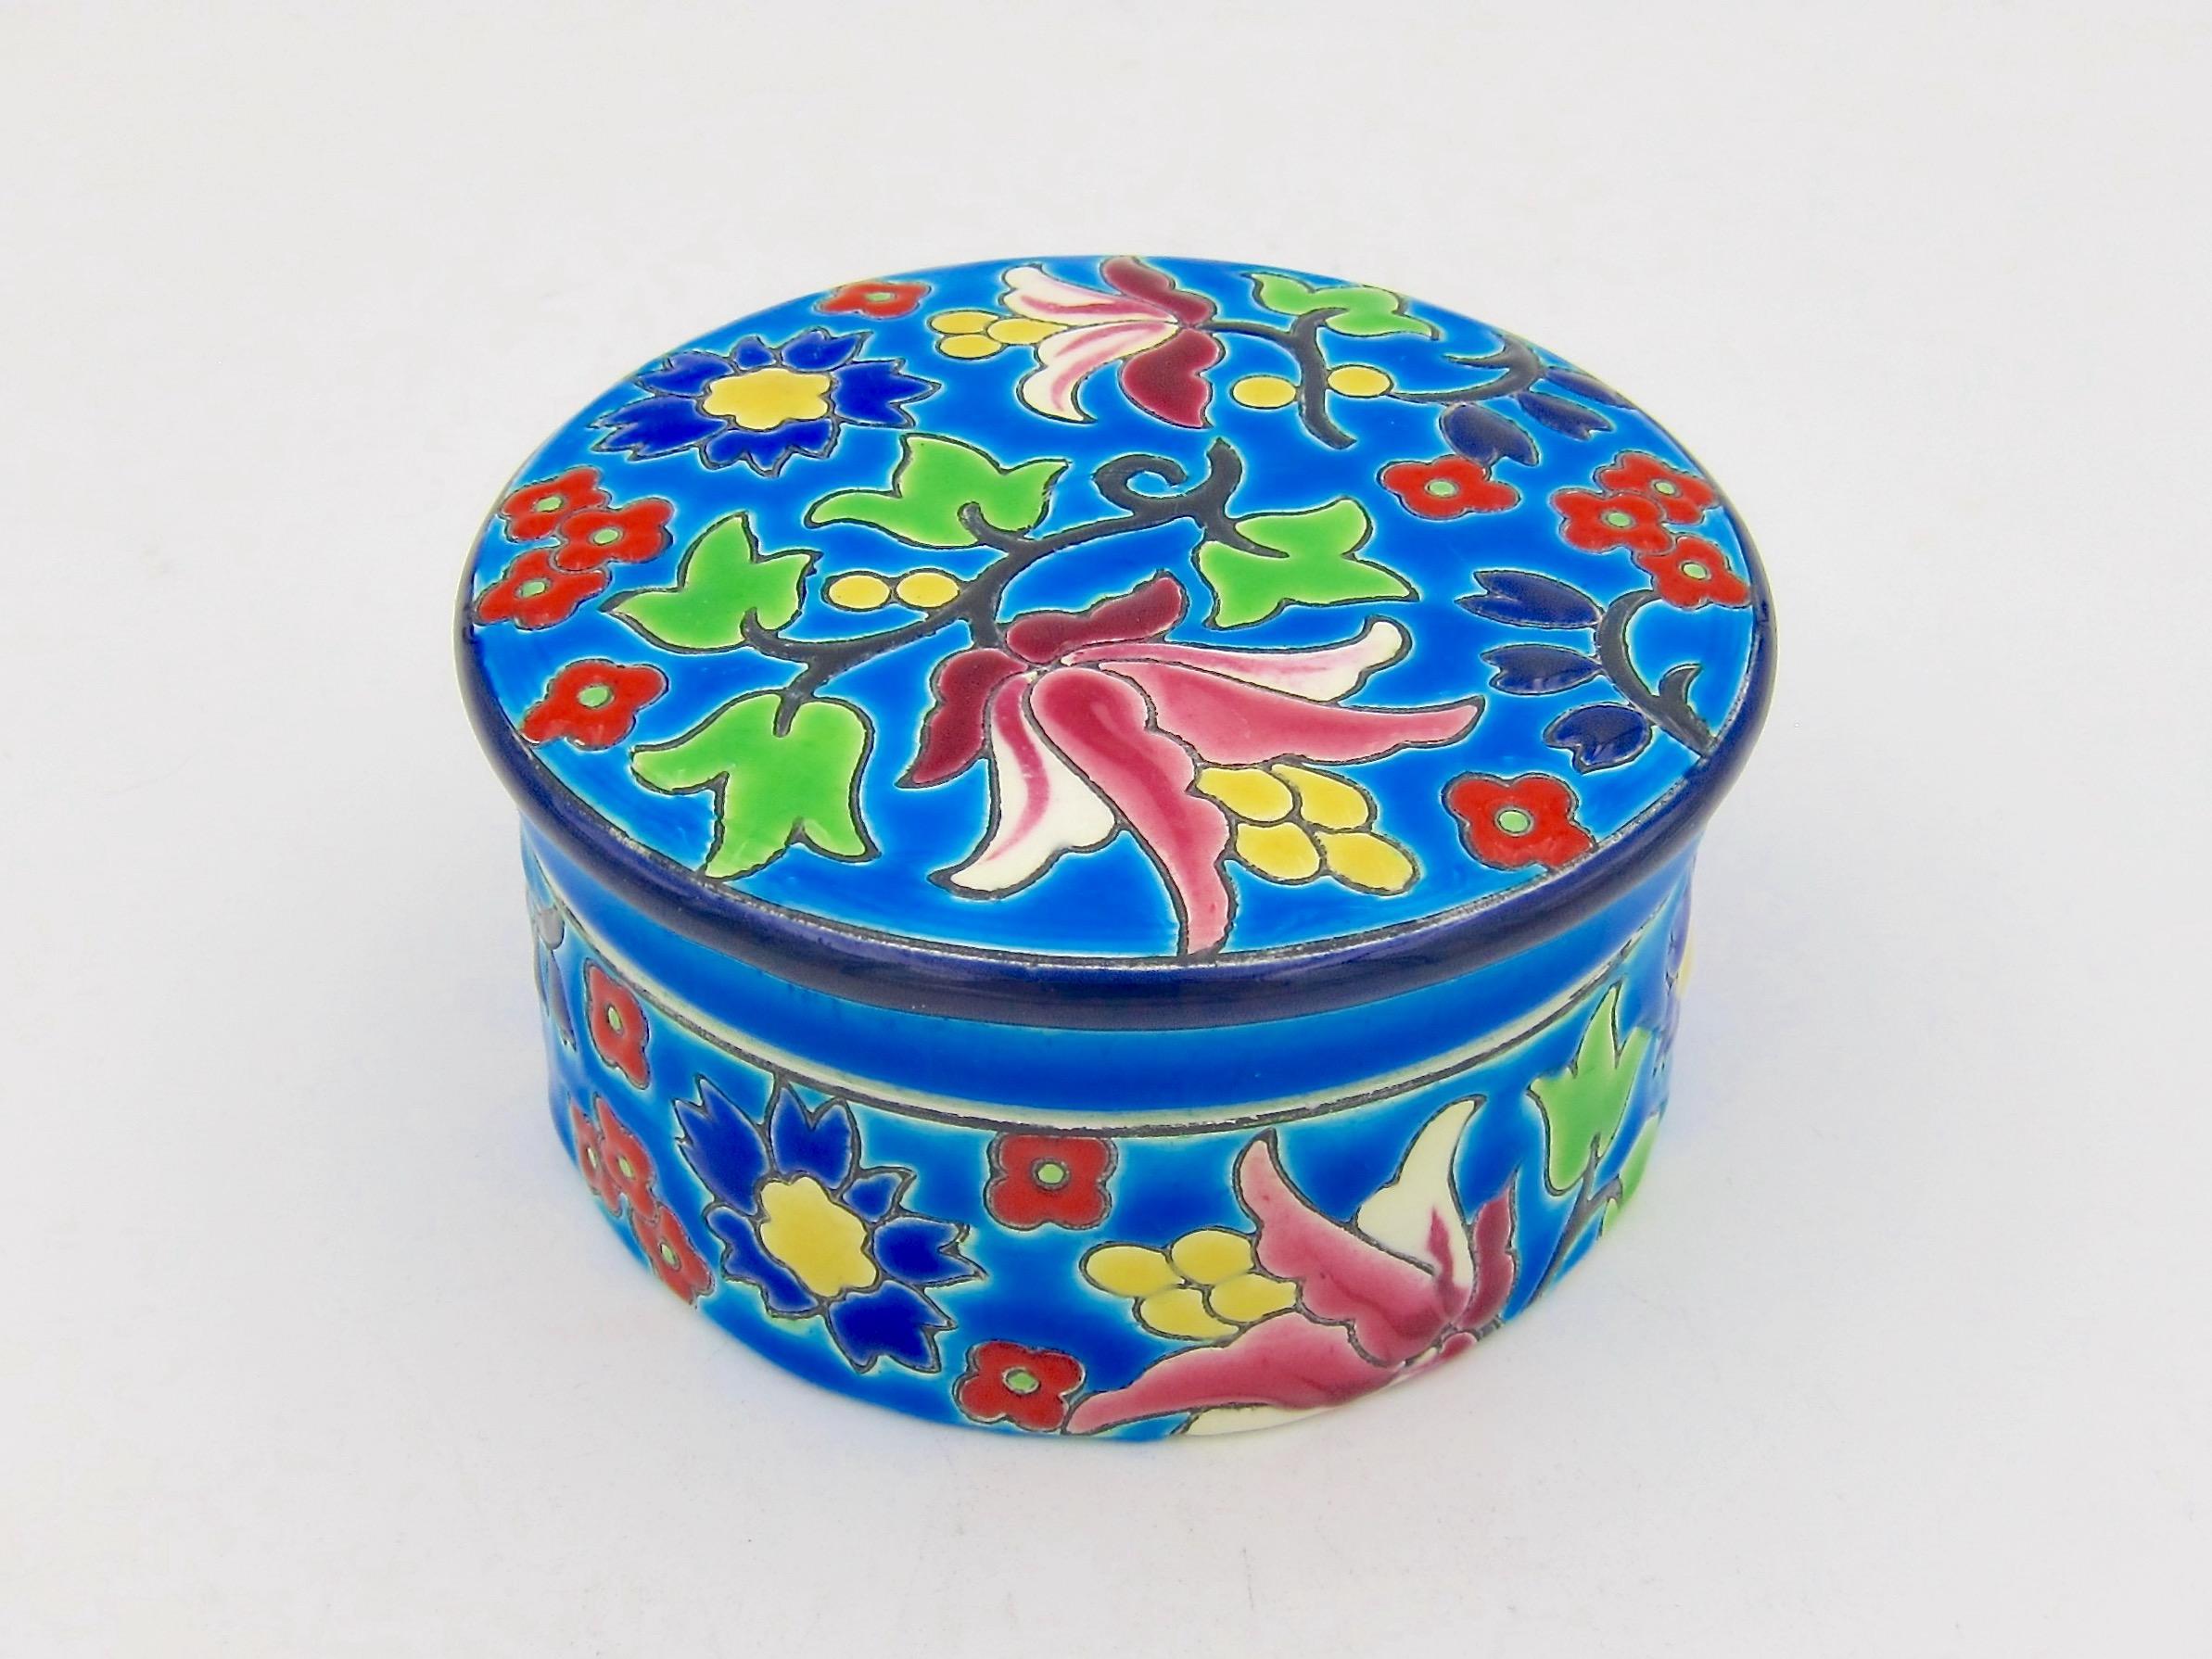 A vintage French faience keepsake, trinket, or vanity box from the Emaux de Longwy art pottery workshop of France. The ceramic box is hand-decorated with a bold and colorful Chinoiserie style glaze of multi-colored blossoms, green leaves, and black